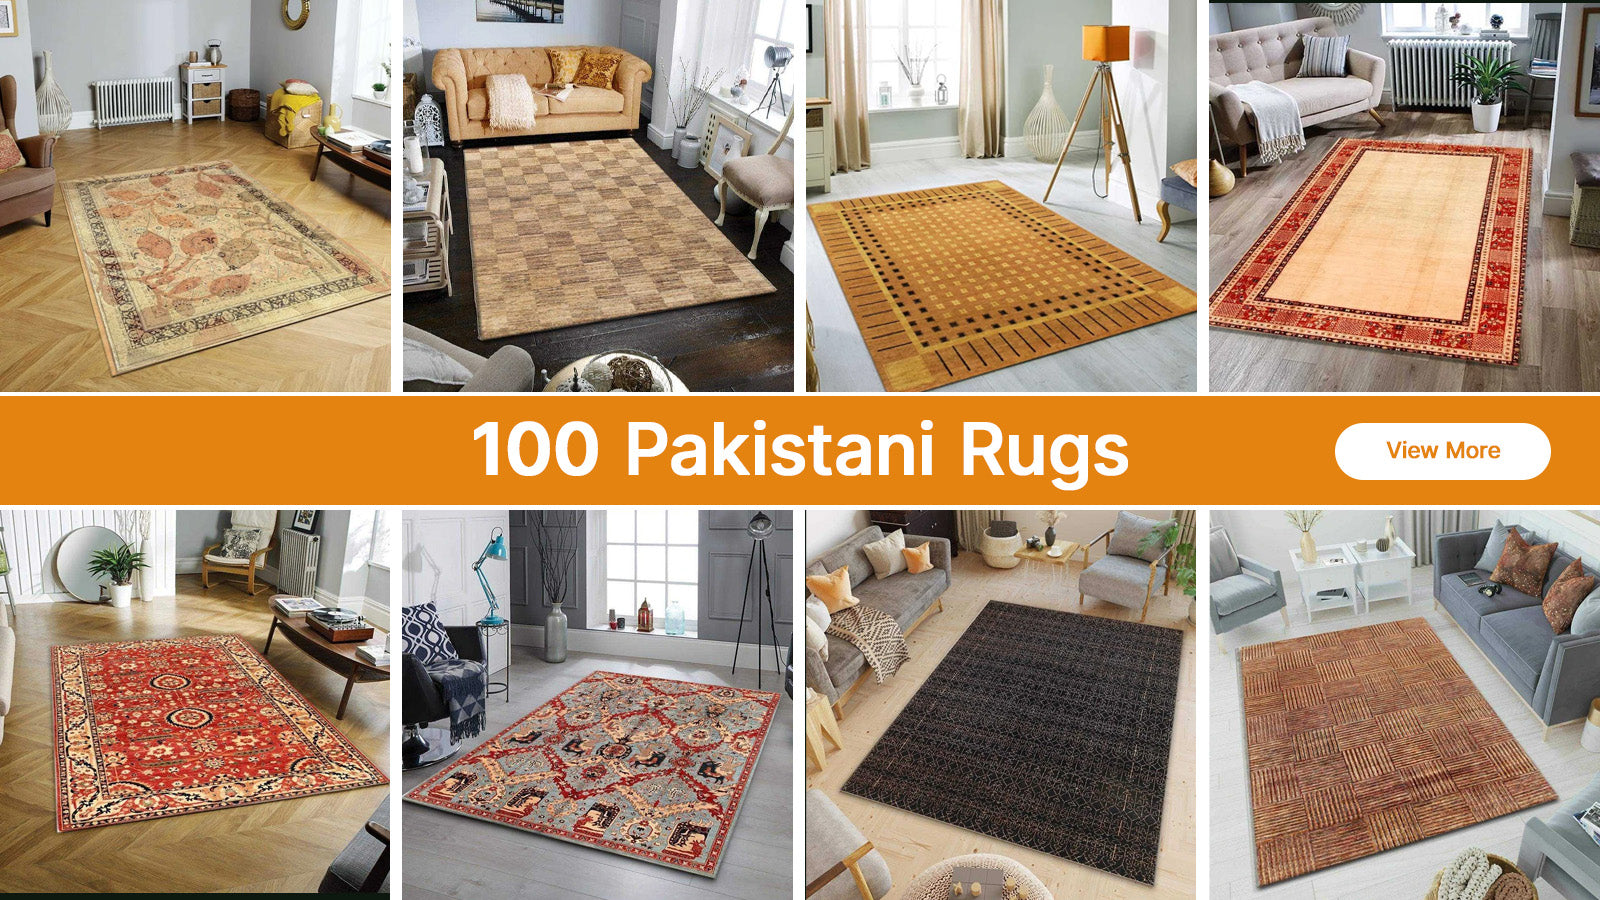 Yes, a Persian Bathroom Rug can Work in your Home! - Jahann & Sons